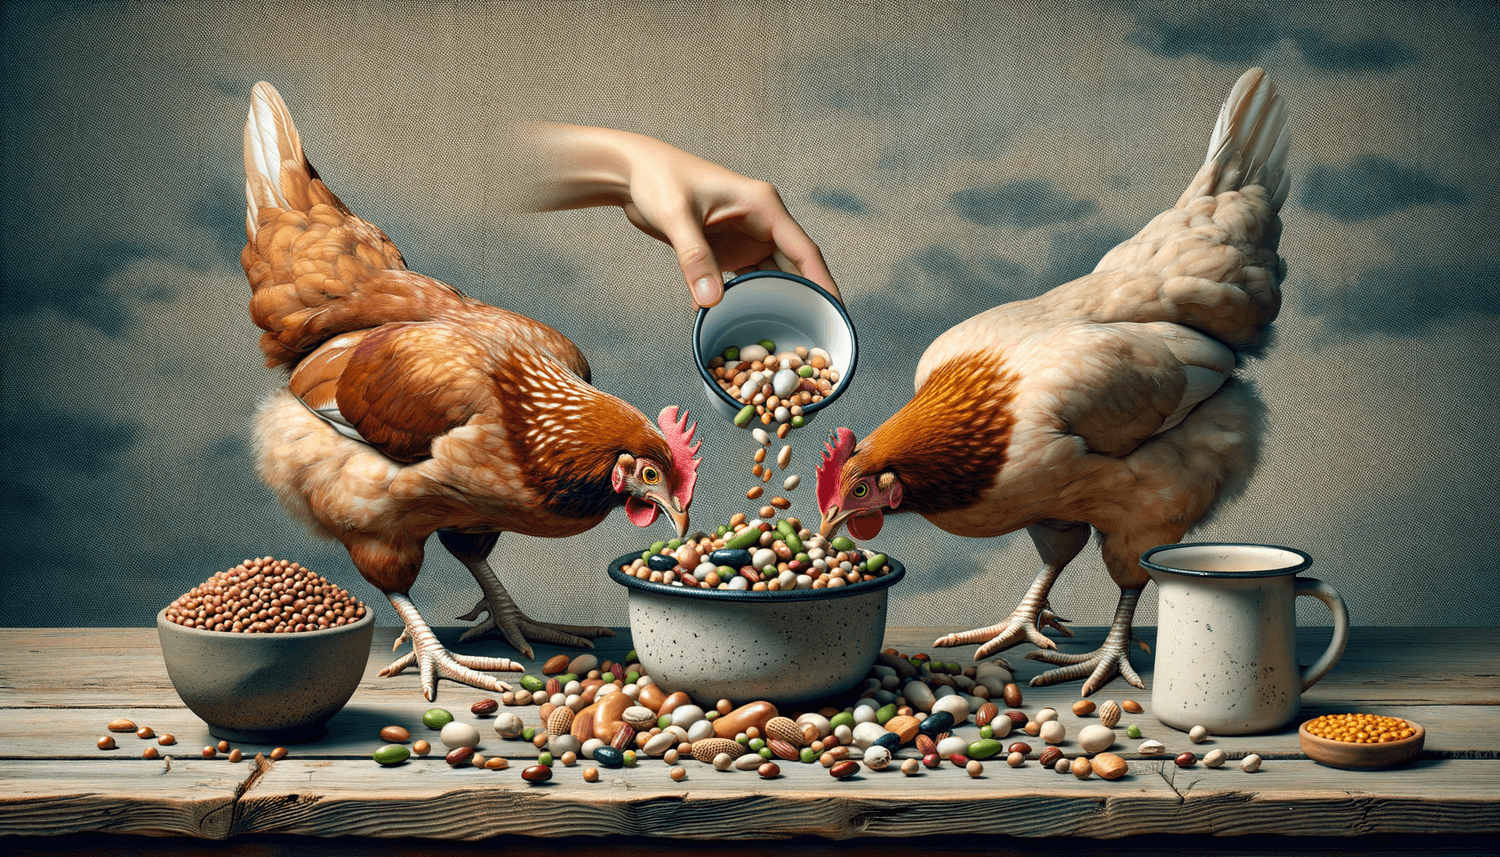 Can Chickens Eat Legumes?